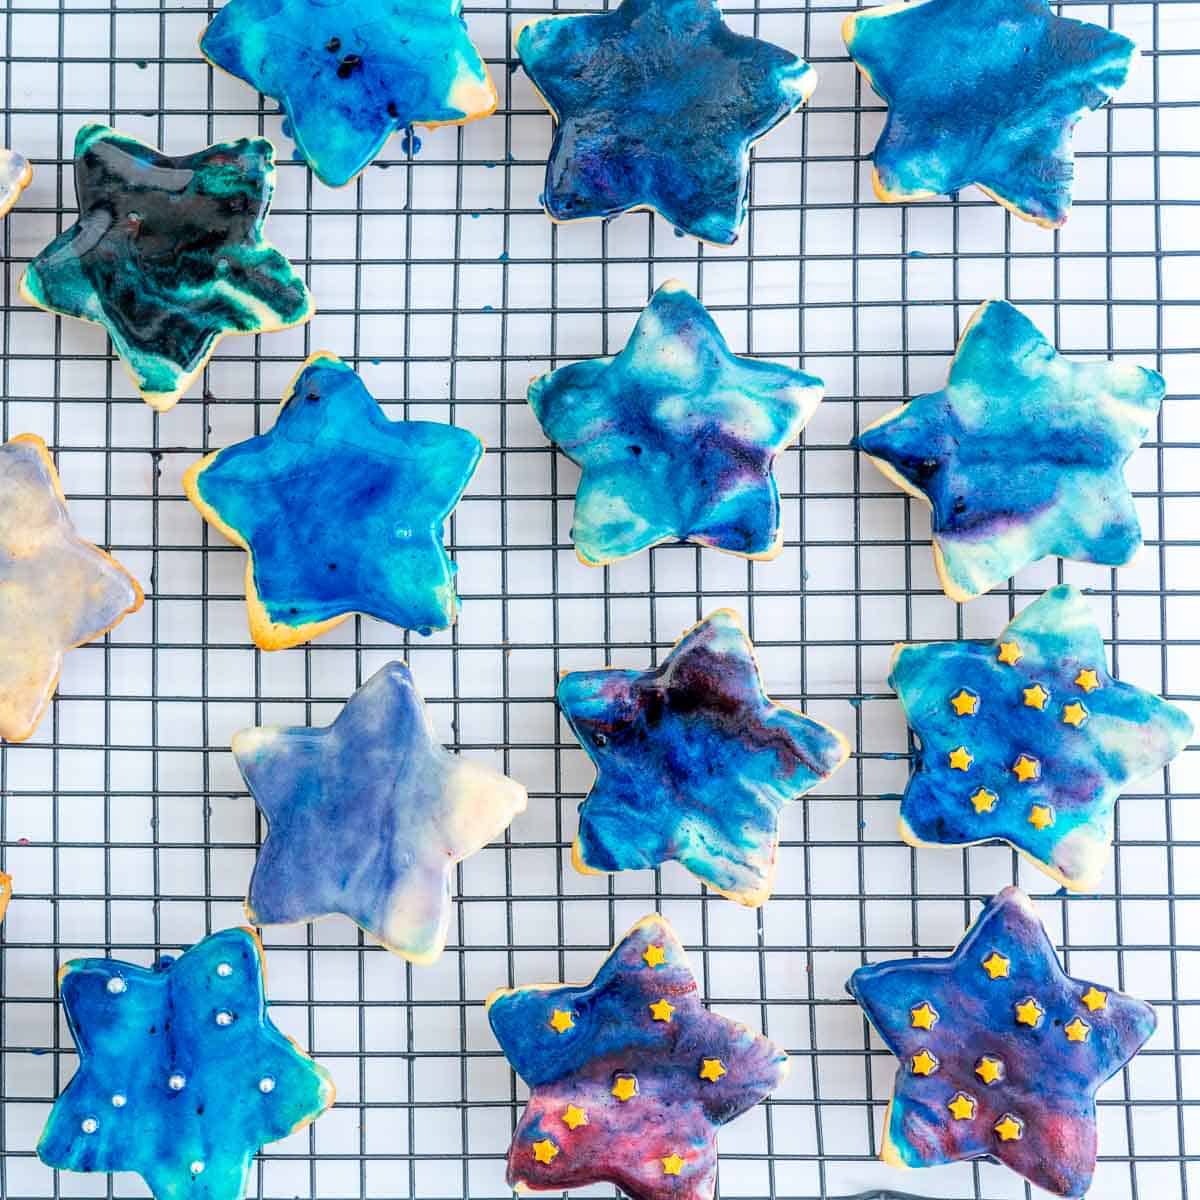 14 star shaped galaxy iced cookies on a wire rack.